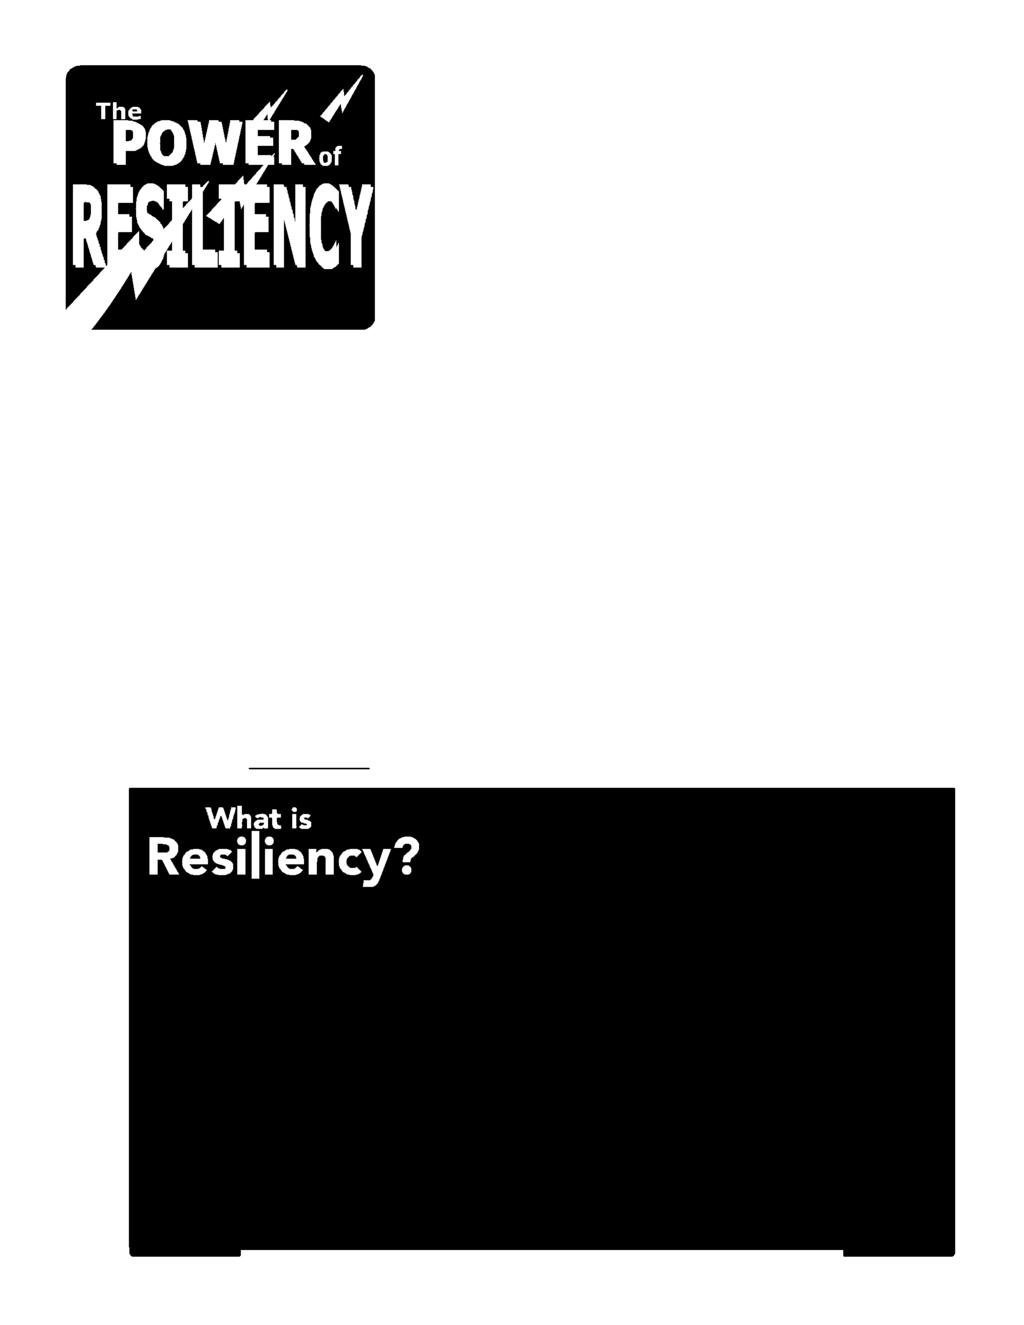 Ground-breaking scientific research from hundreds of studies worldwide has recently identified the key components of resiliency - the unique beliefs, attitudes and life skills that are essential for